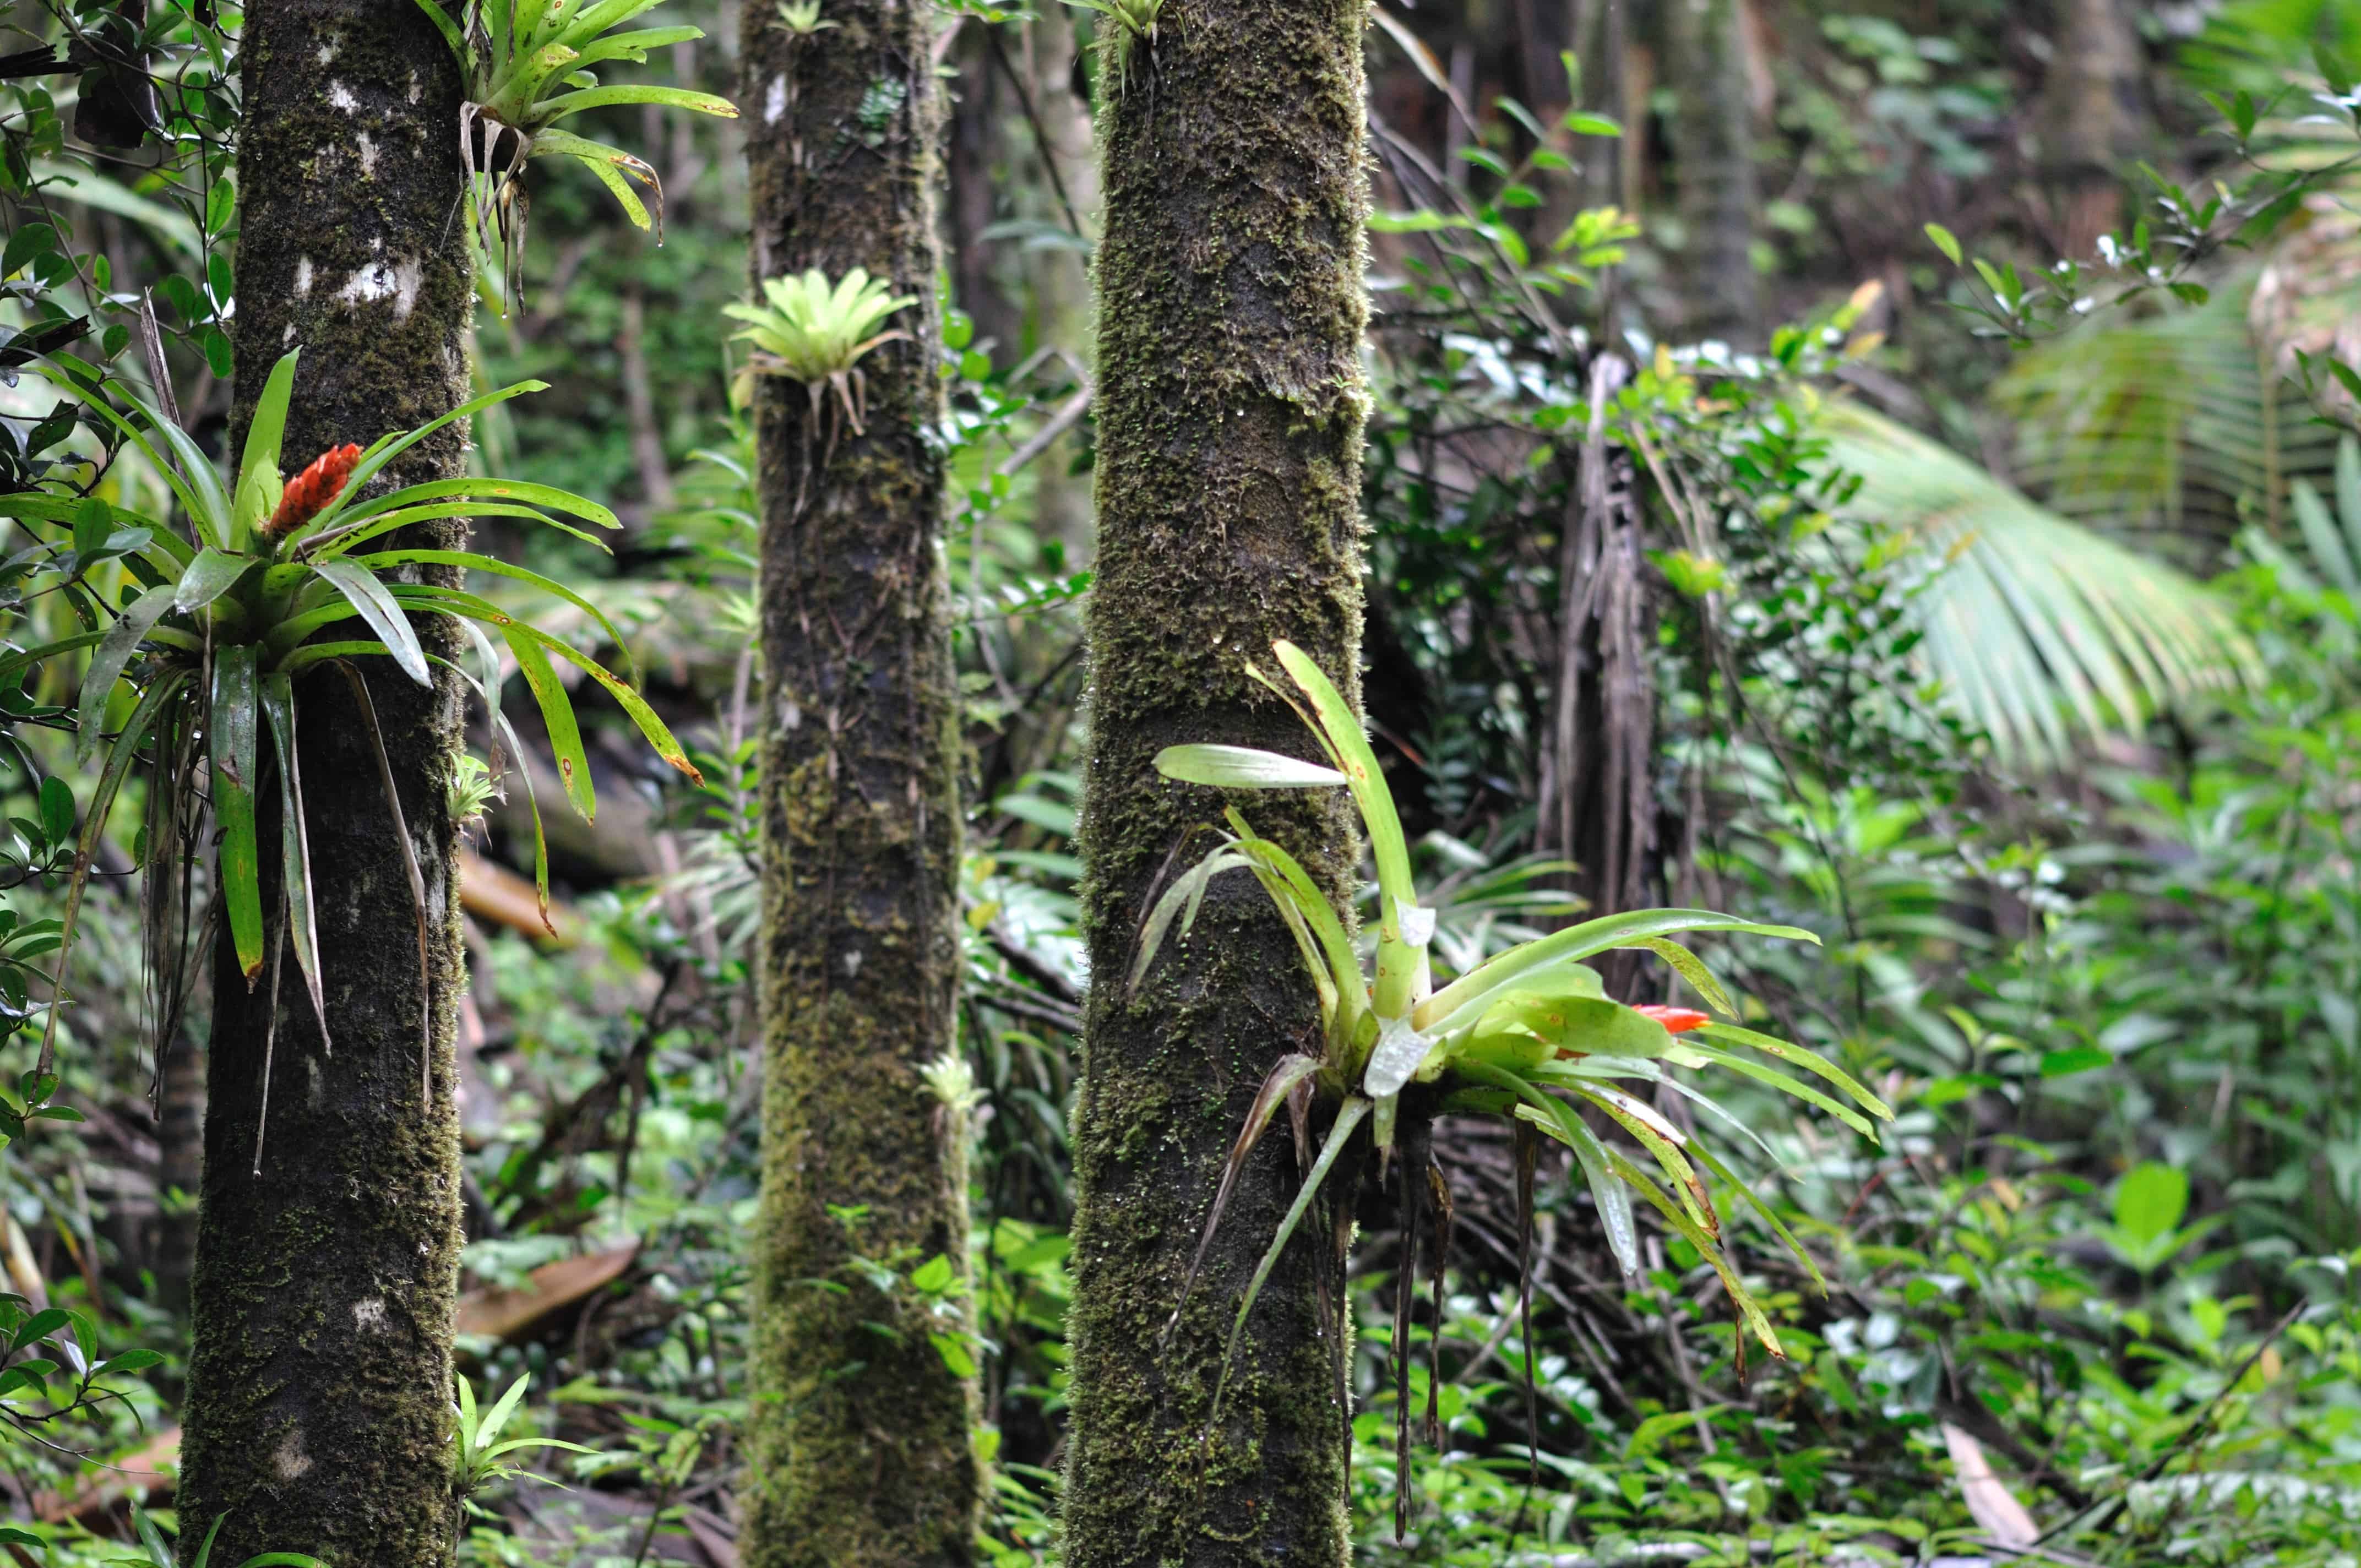 Bromeliads on tree trunks in the Luquillo rainforest, Puero Rico. Credit: Wikimedia Commons.